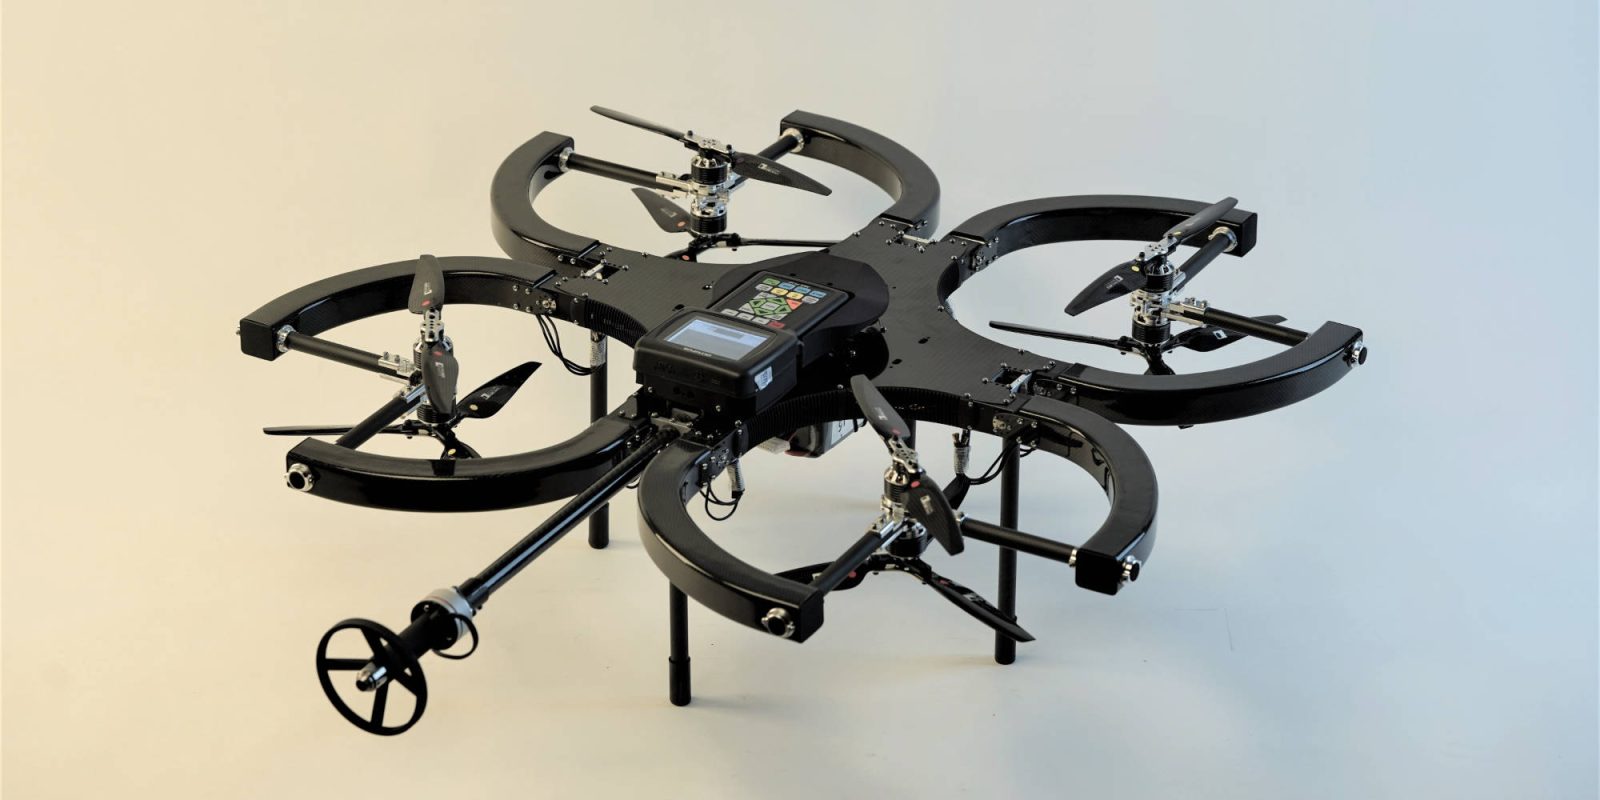 Skygauge inspection drone